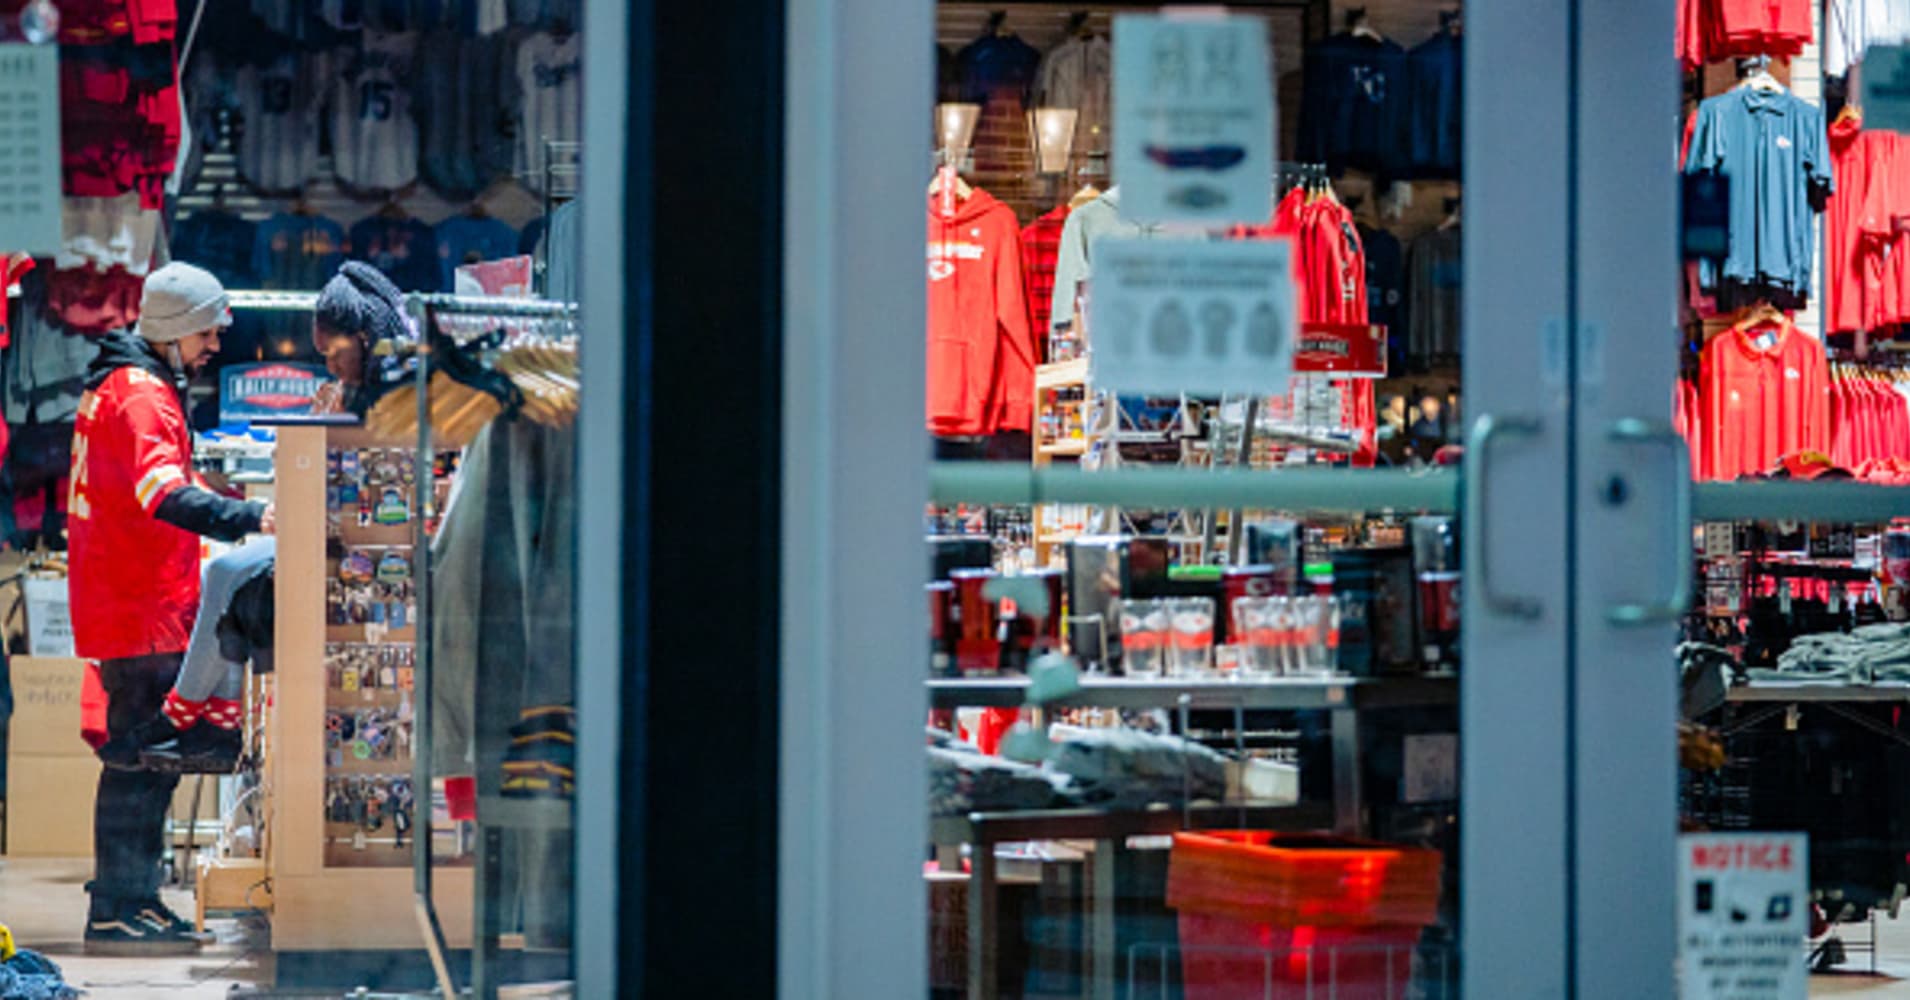 these 10 retail brands are the fastest growing in the u.s., yelp says